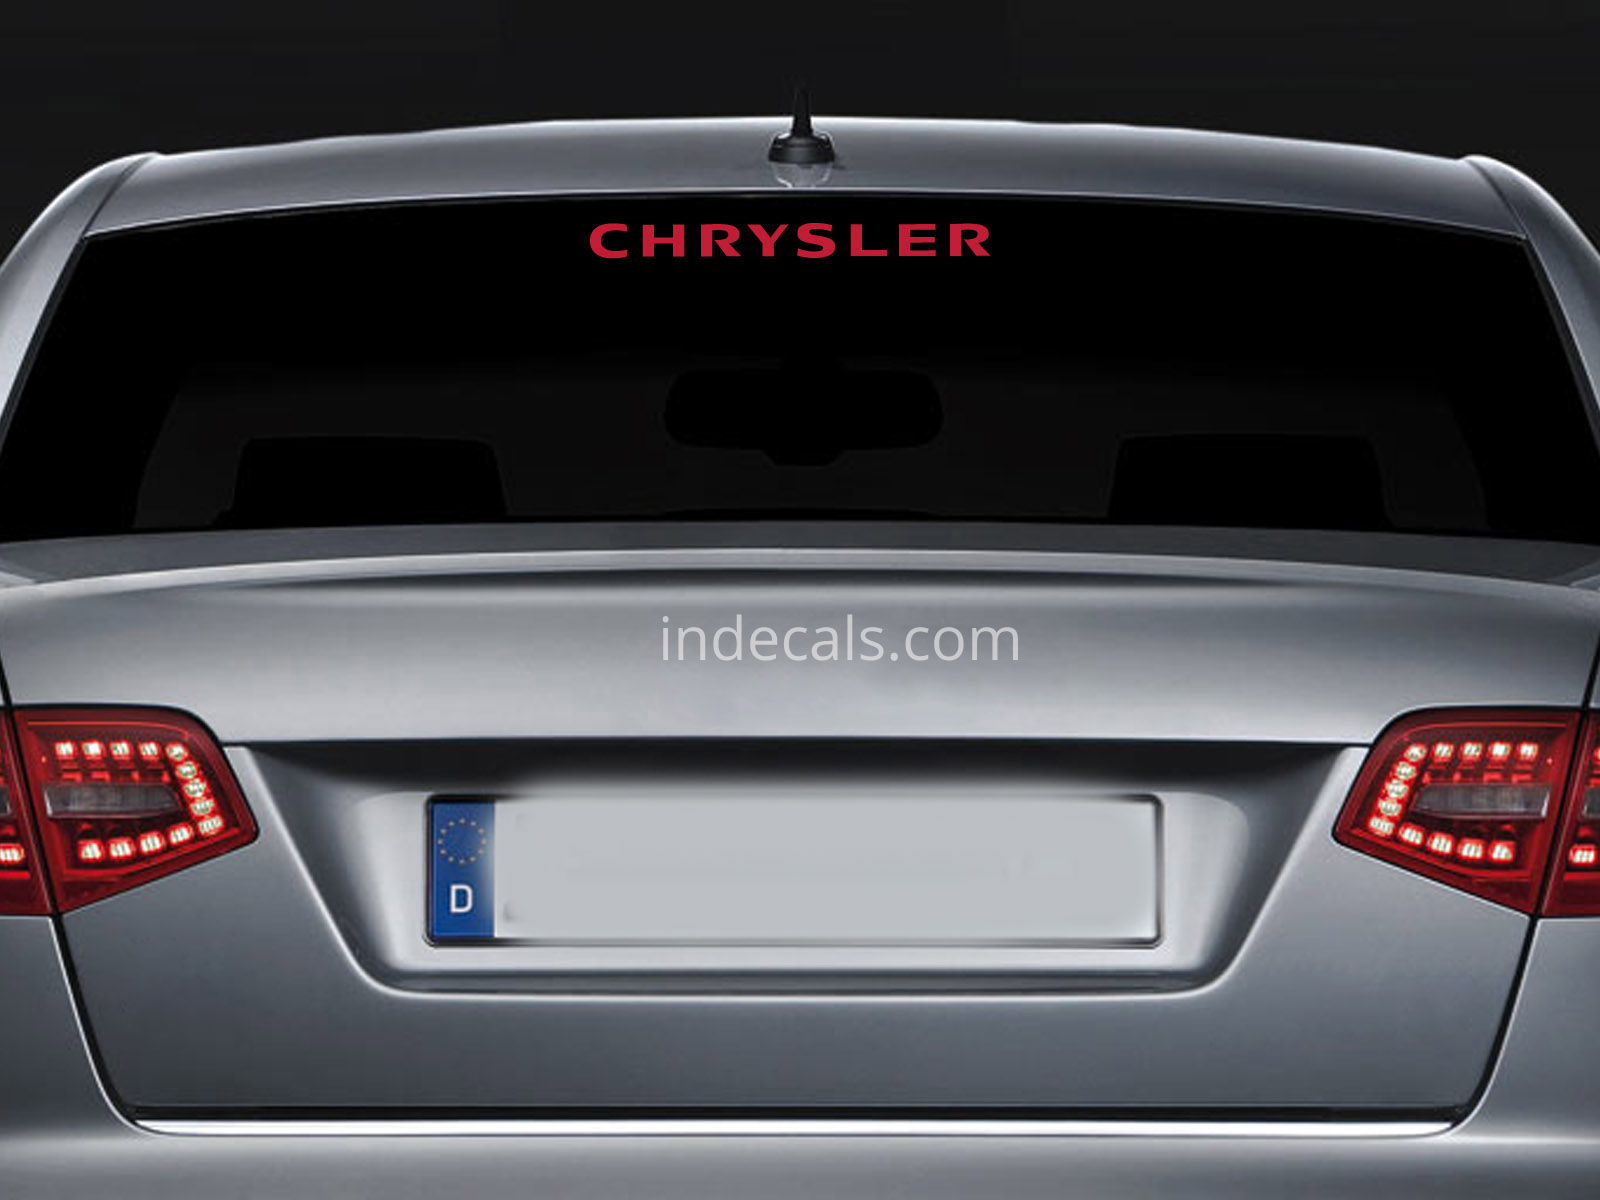 1 x Chrysler Sticker for Windshield or Back Window - Red